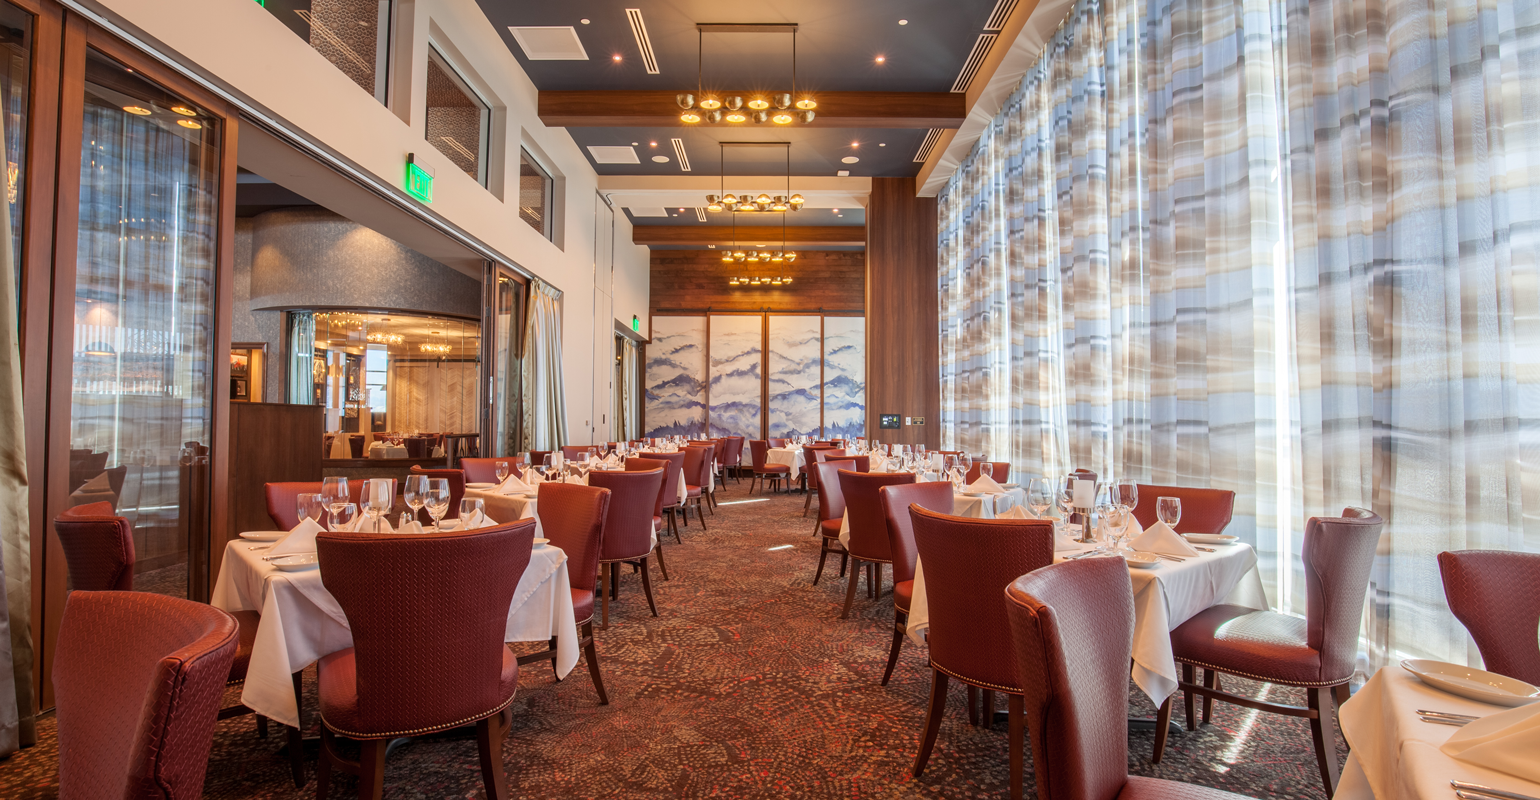 Ruth's Chris takes pride in hosting guests' special moments Nation's